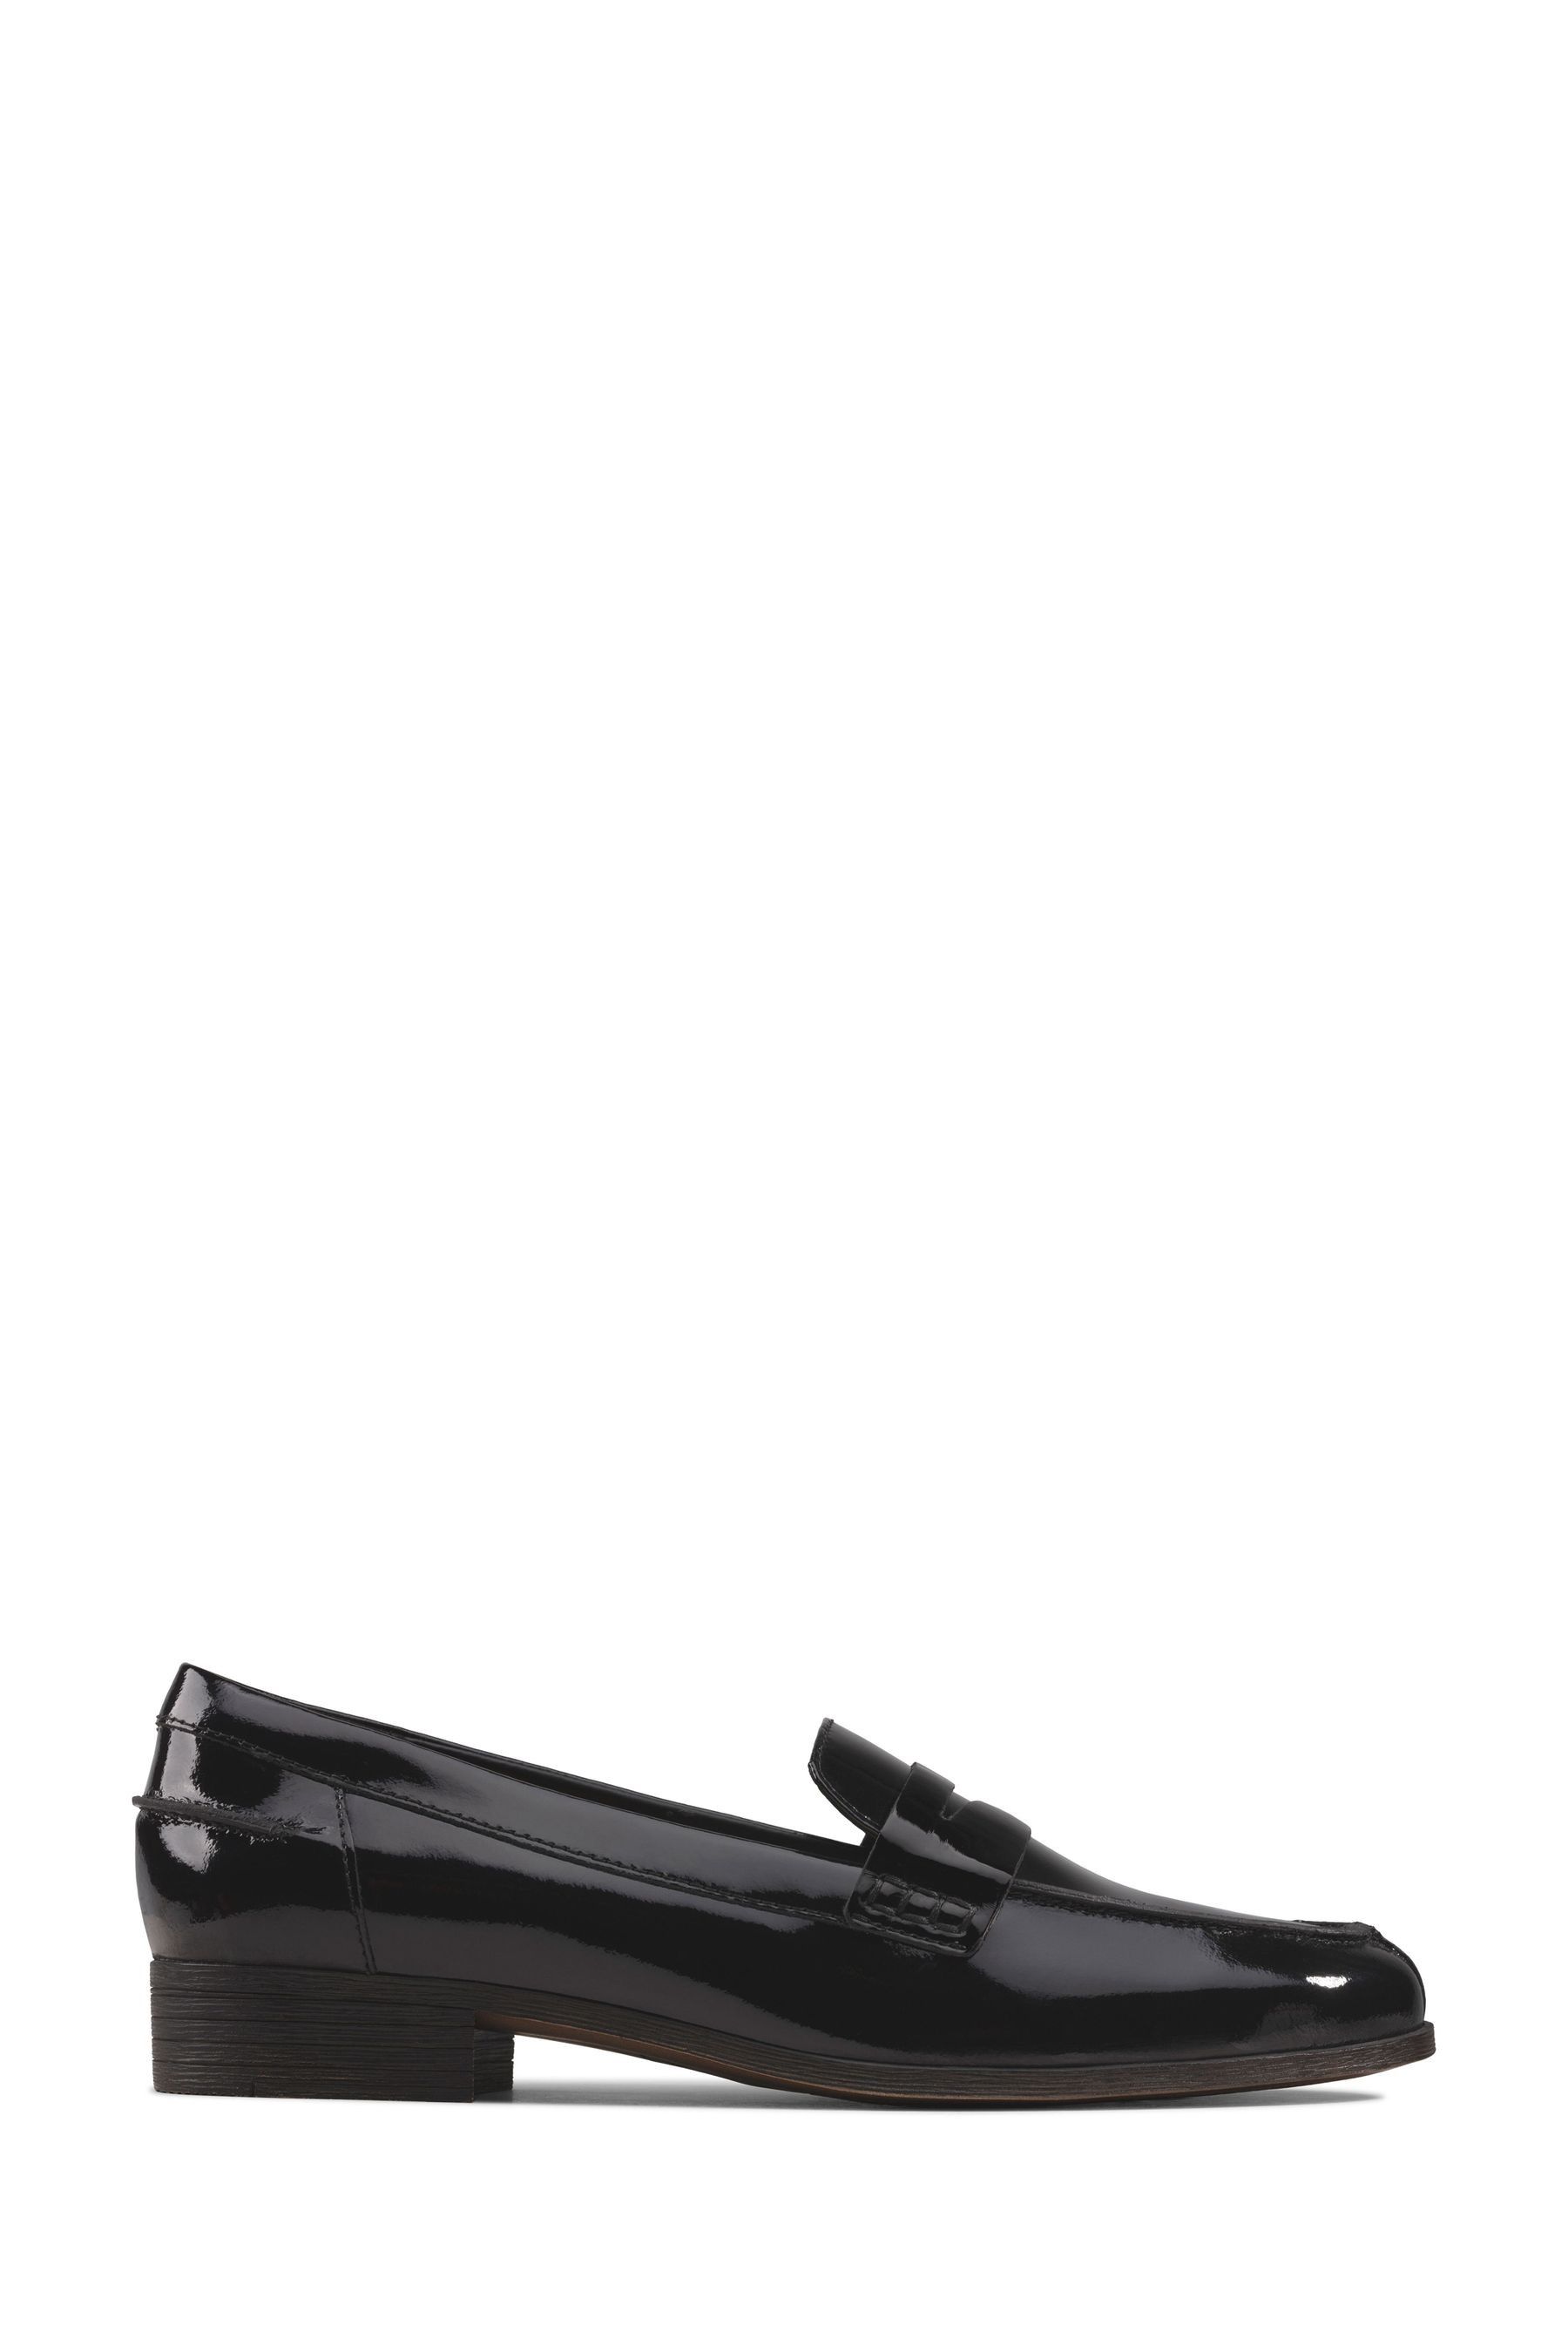 Buy Clarks Black Pat Hamble Wide Fit Loafer Shoes from the Next UK ...